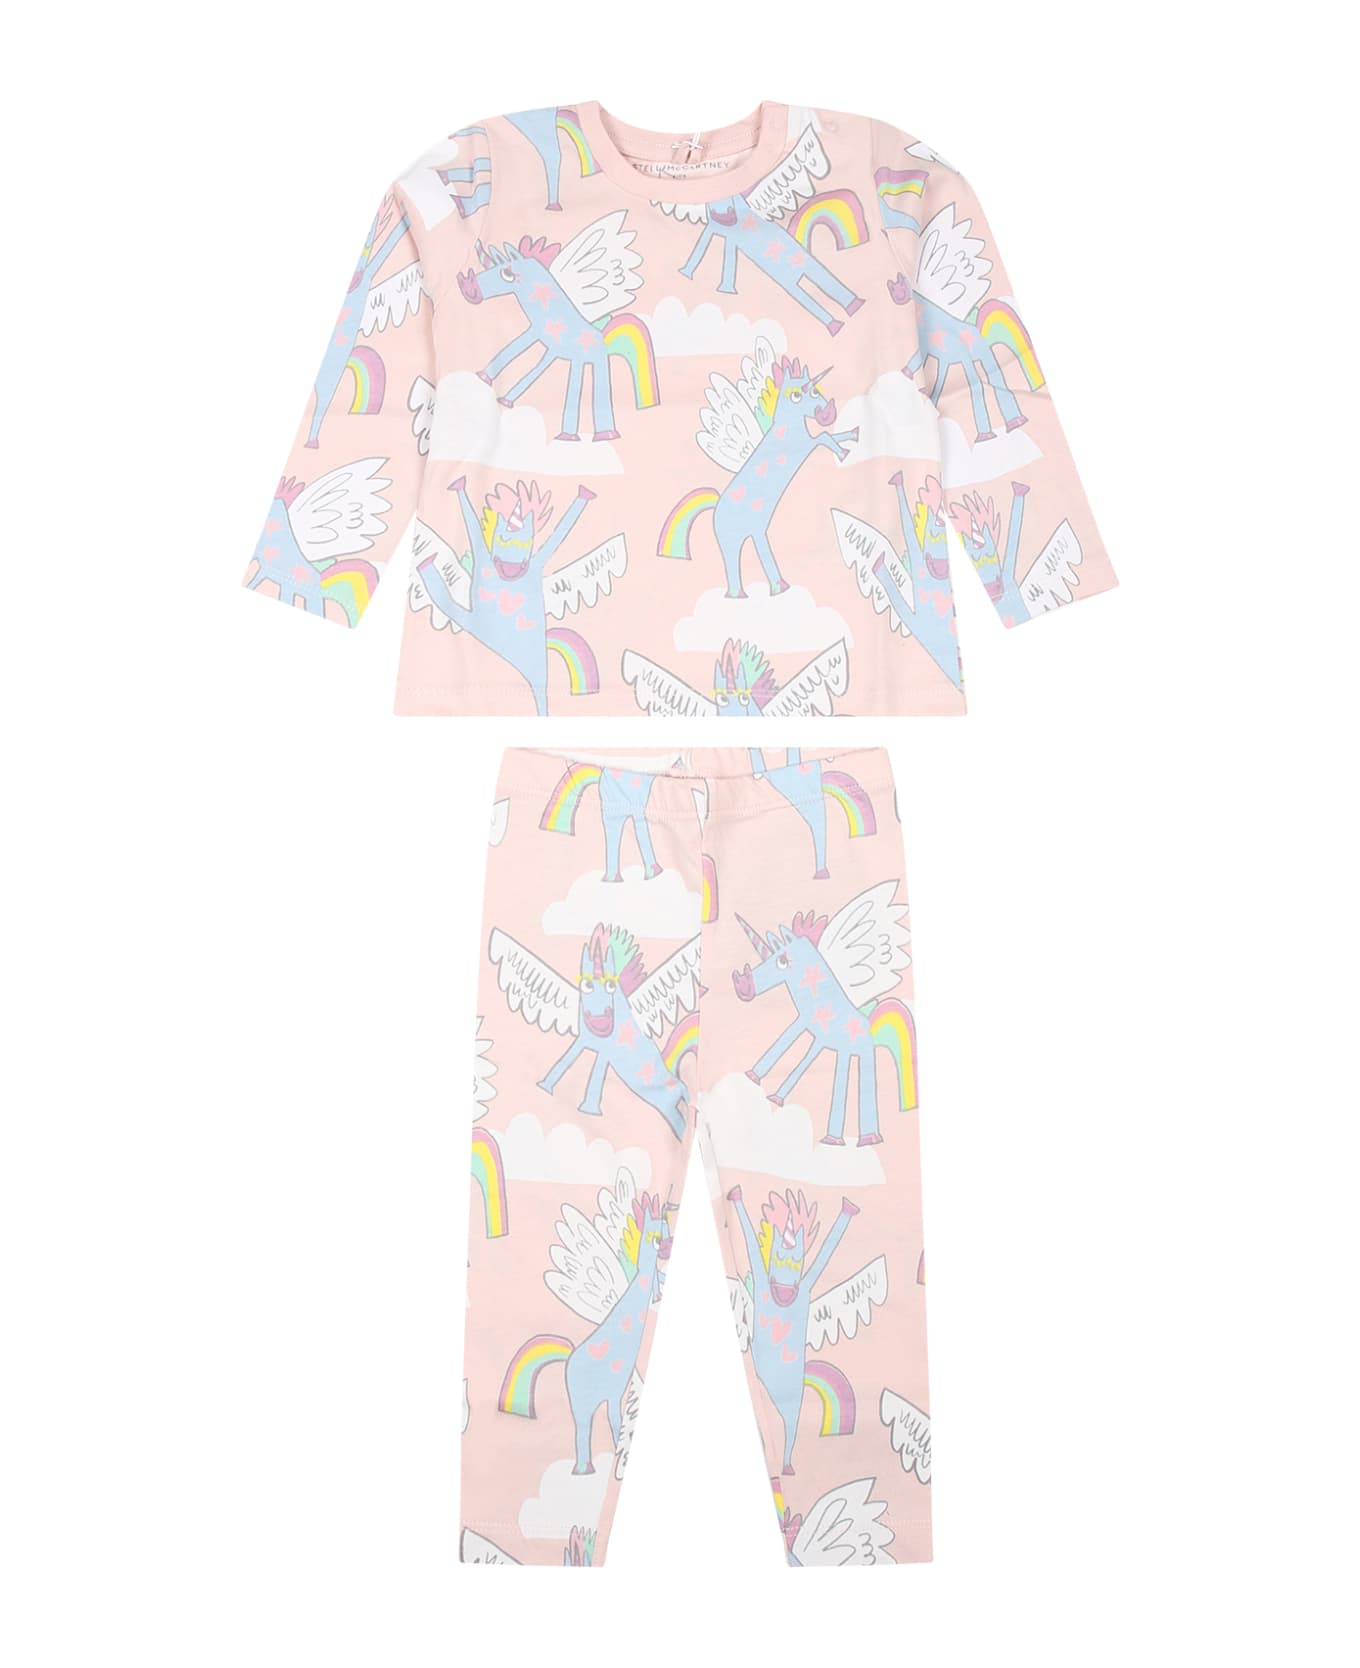 Stella McCartney Kids Pink Suit For Baby Girl With Unicorn - Pink